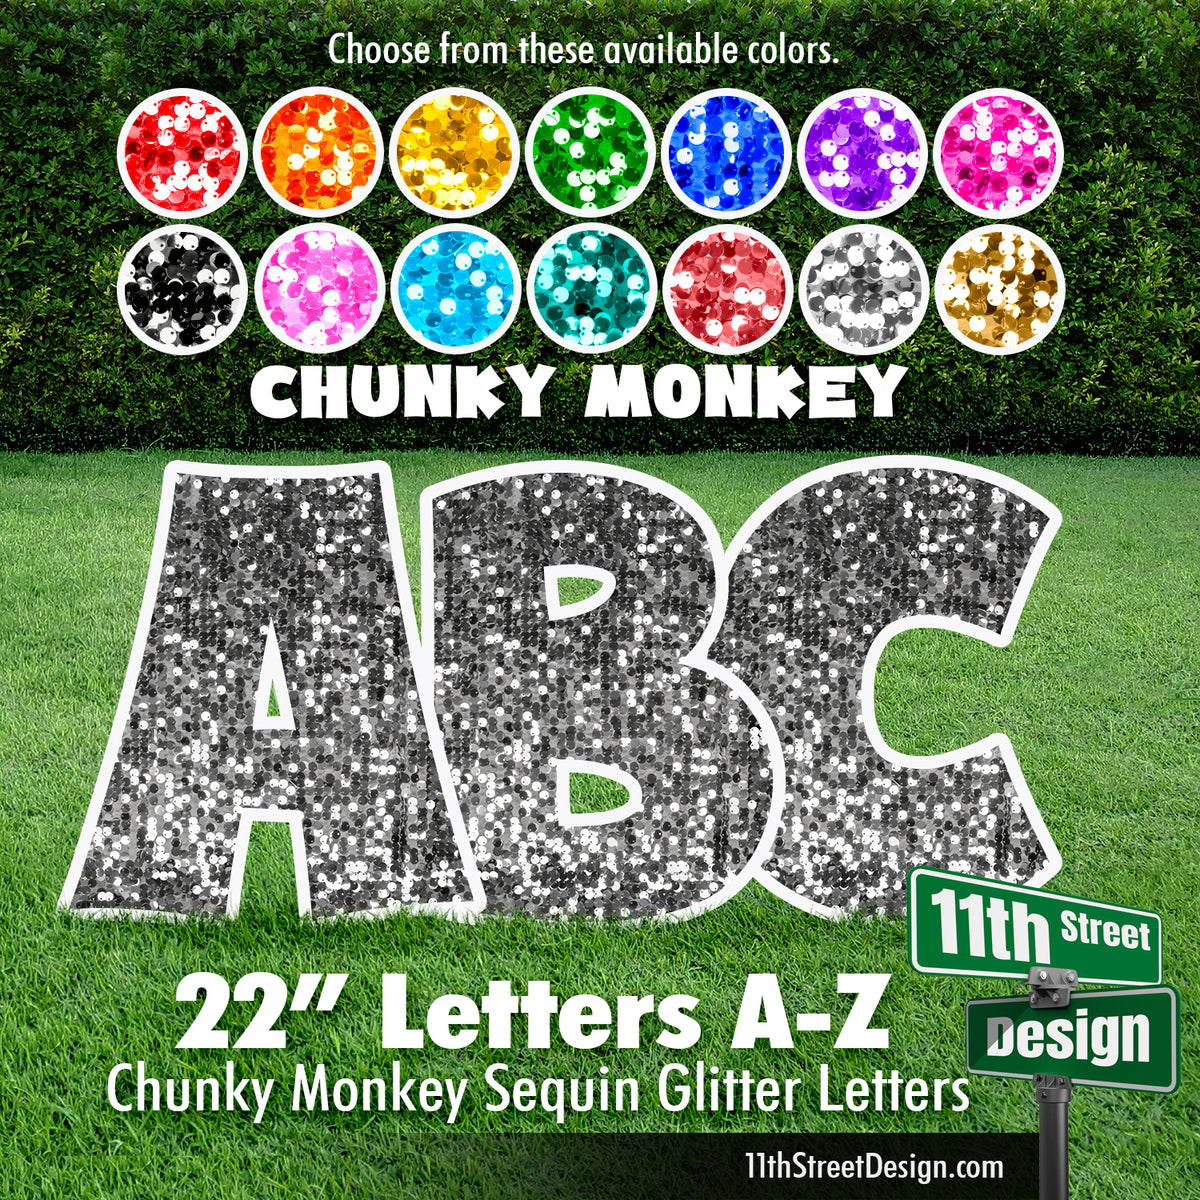 Sequin Glitter 22&quot; Chunky Monkey 26 Letter Alphabet Yard Card Set Includes Letters A-Z